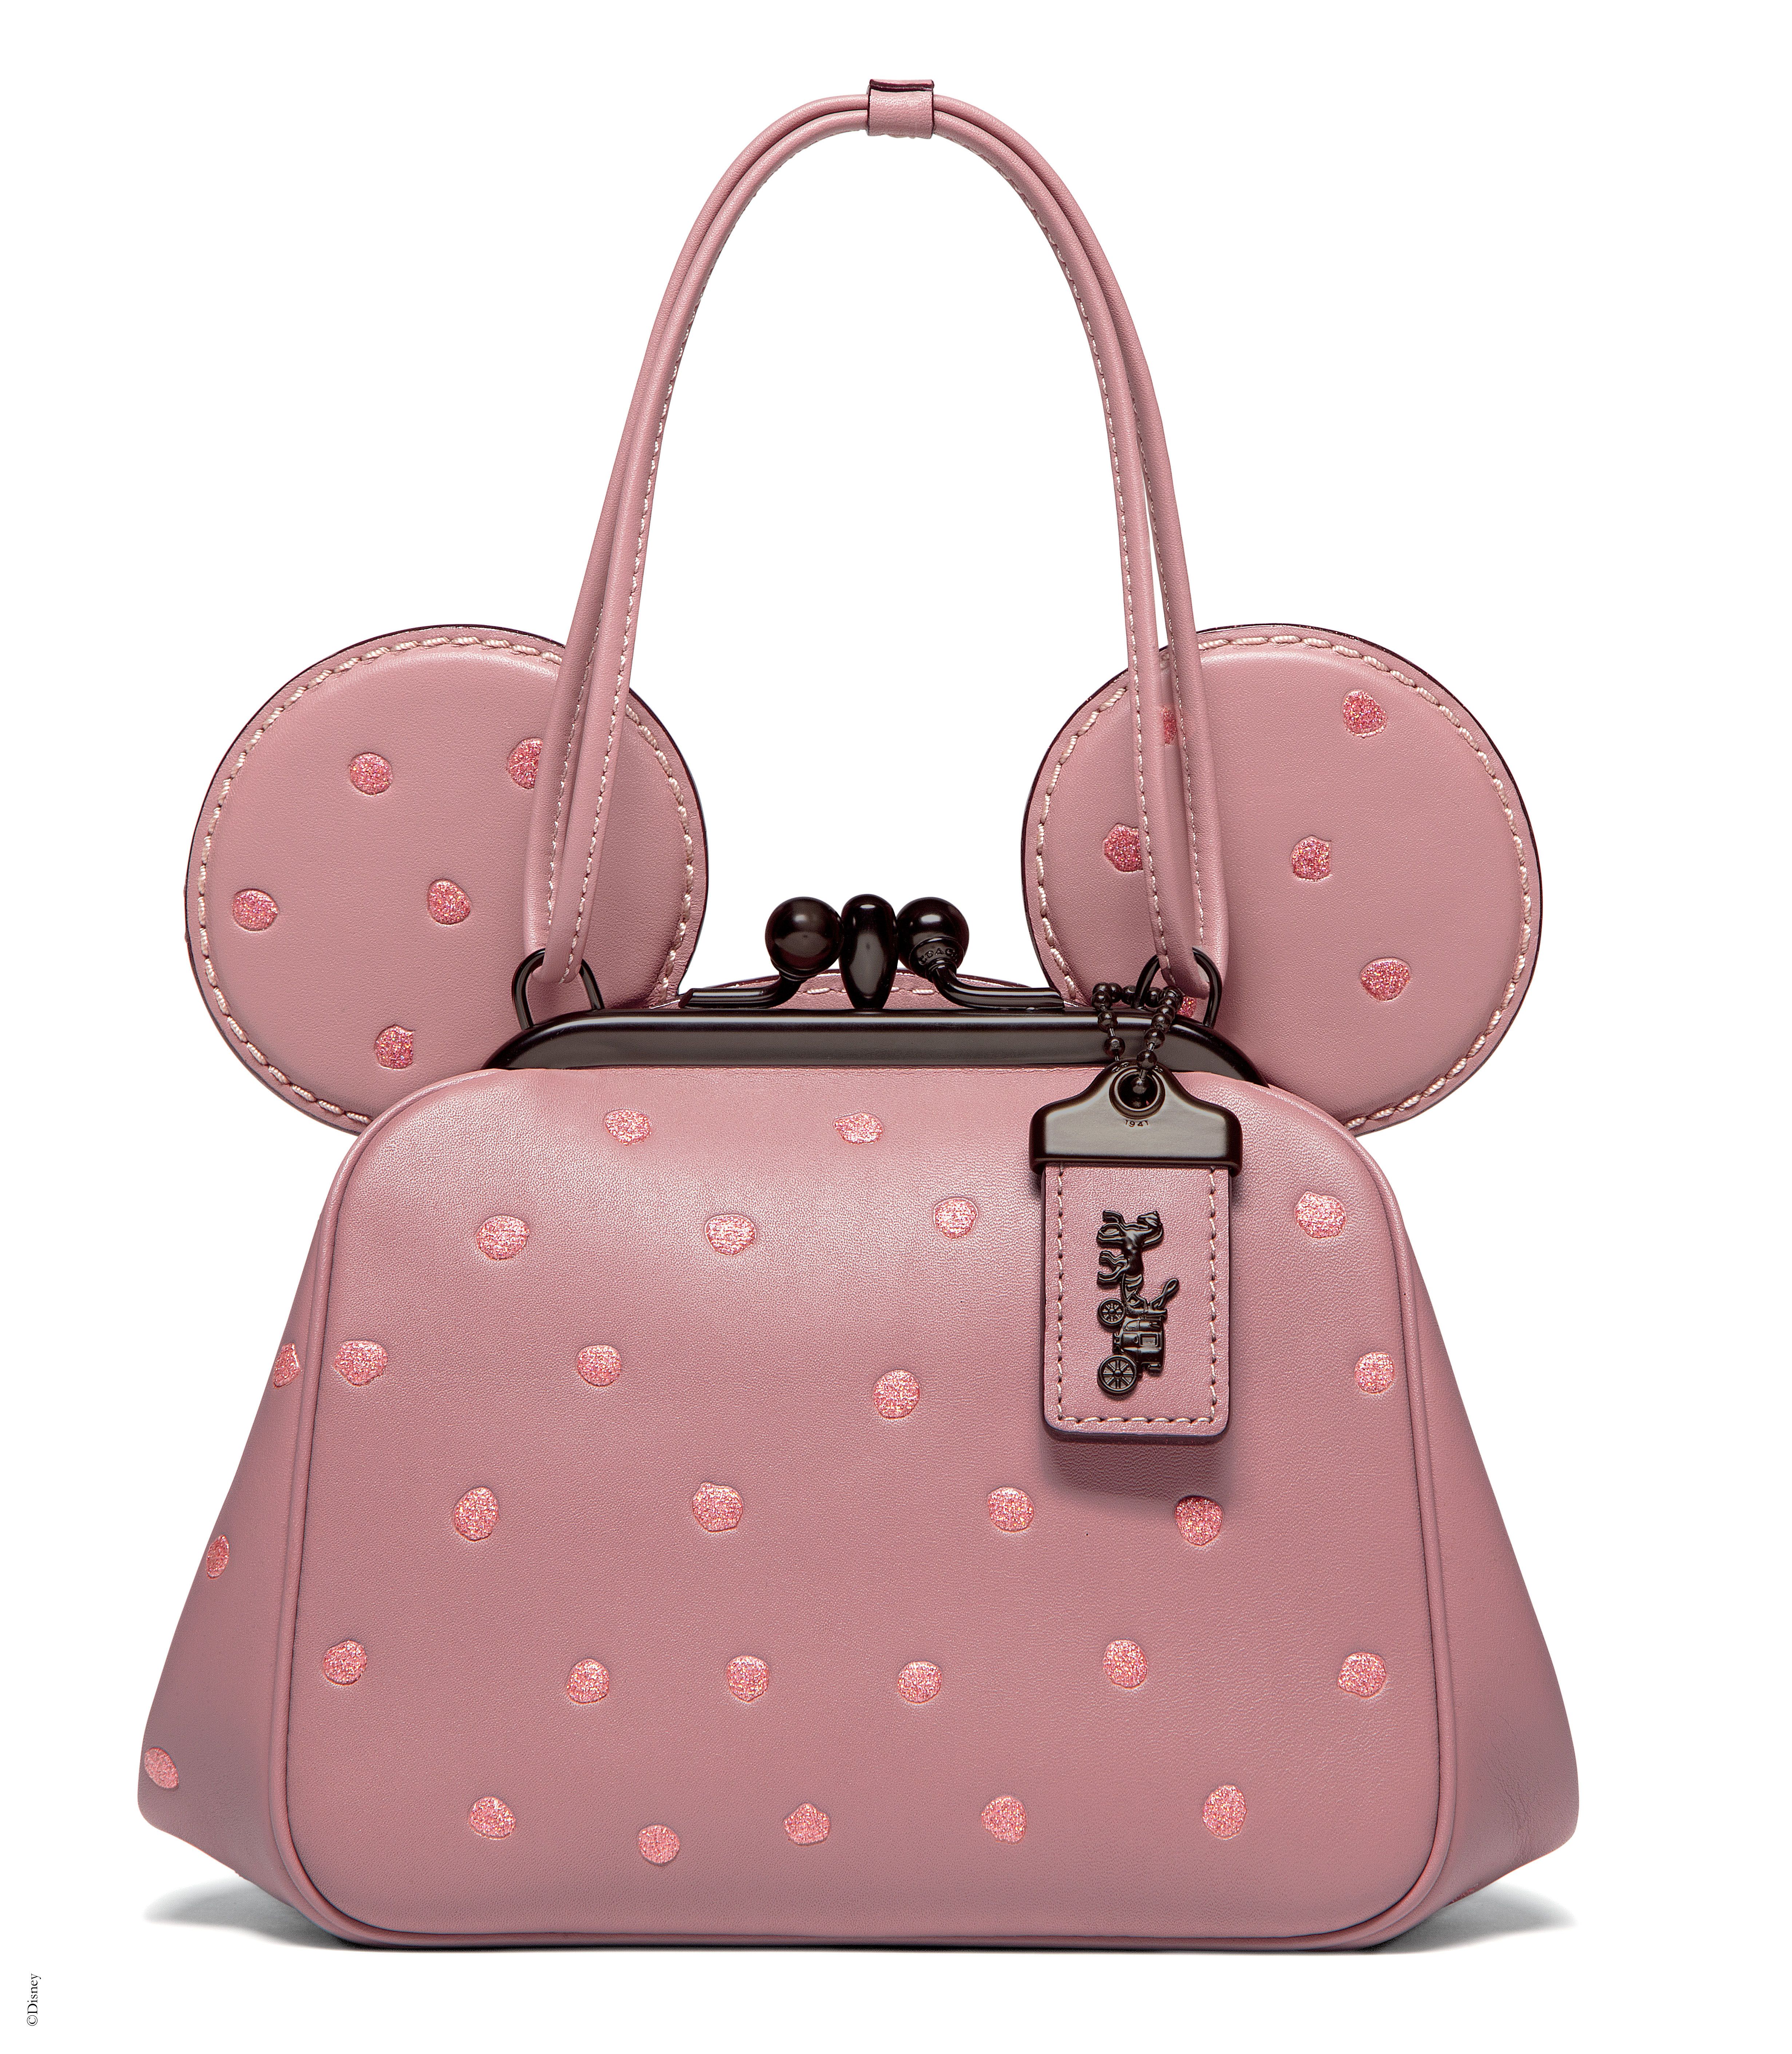 Disney Mickey Mouse All Ears Fashion Handbag Adorned With An All Over  Pattern Of Mickey Mouse Ears With An Adjustable Strap And Silver-Tone  Hardware